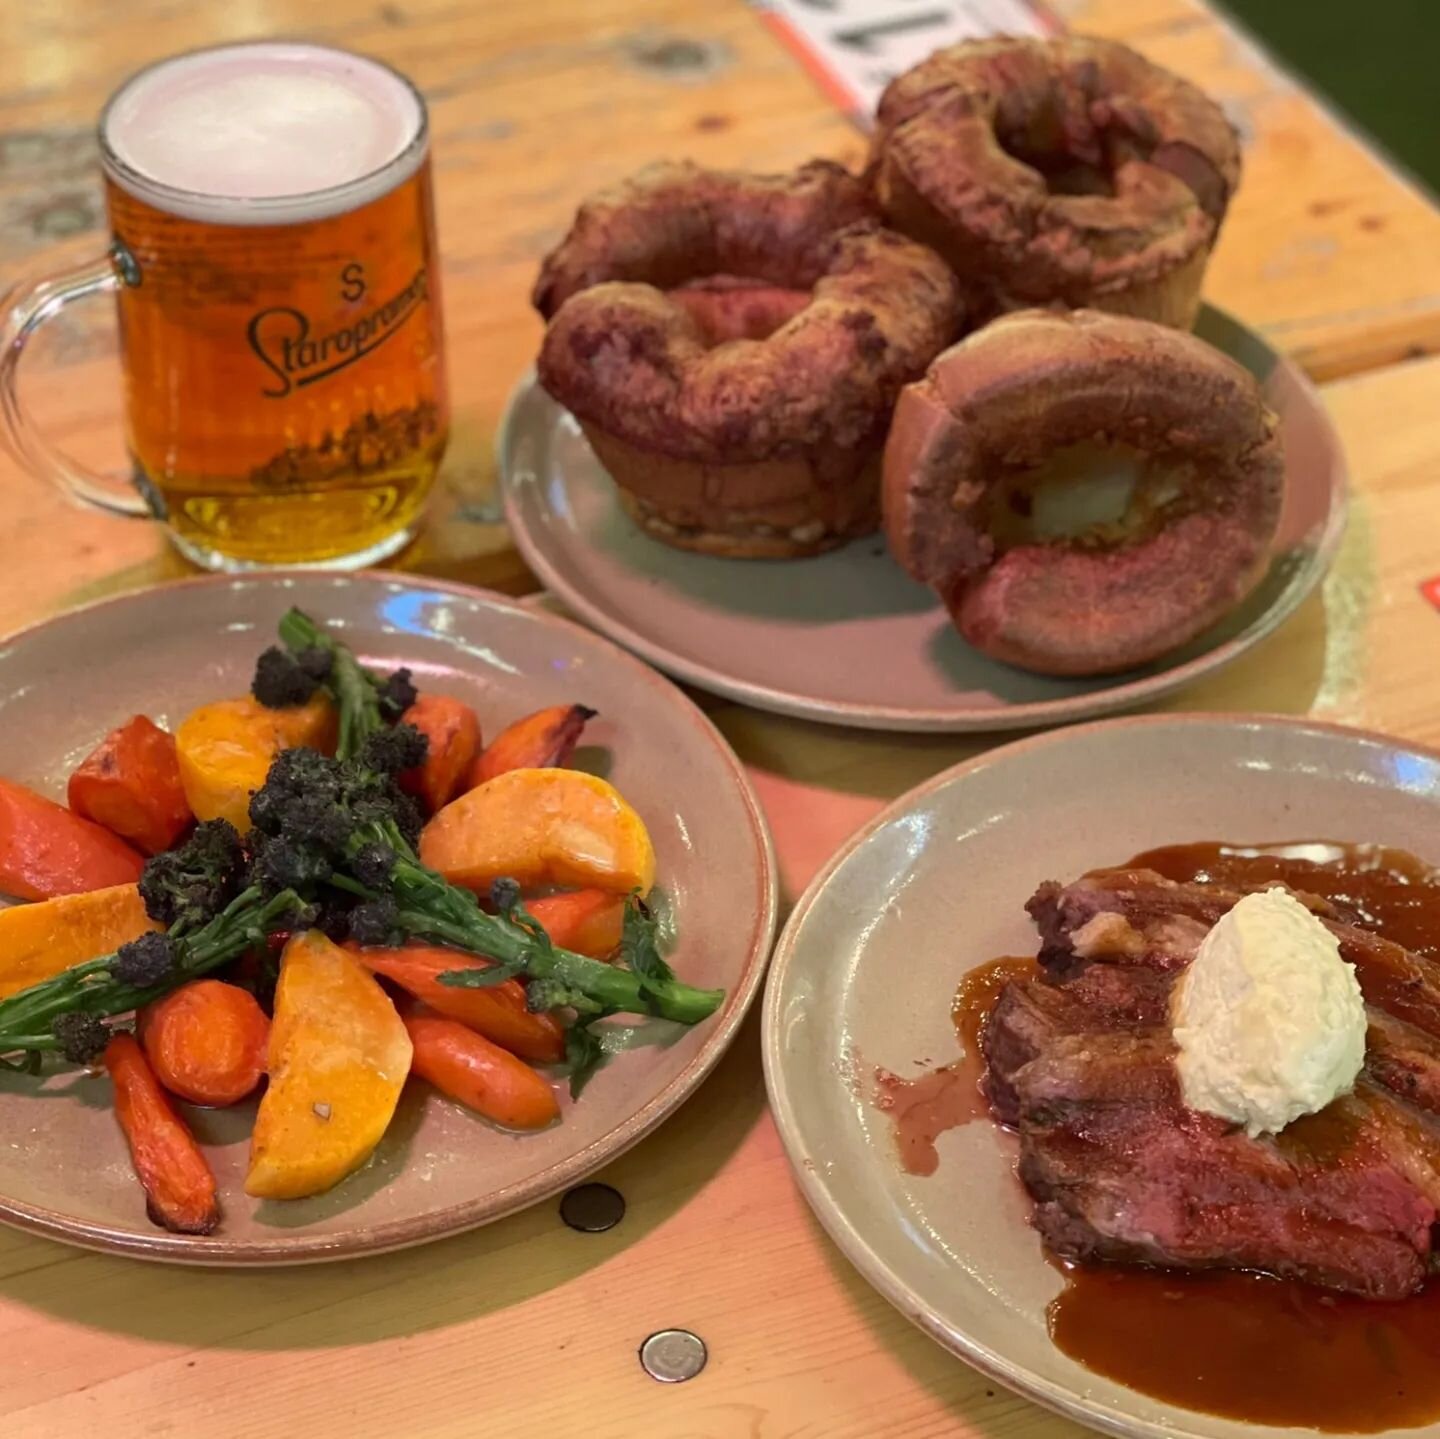 Did you know we serve delicious roasts on Sundays? 🙌 with England v Italy @15:00 on our big screen &amp; tasty food on your table... it's the perfect relaxed Sunday setup! Book now 😍🏉